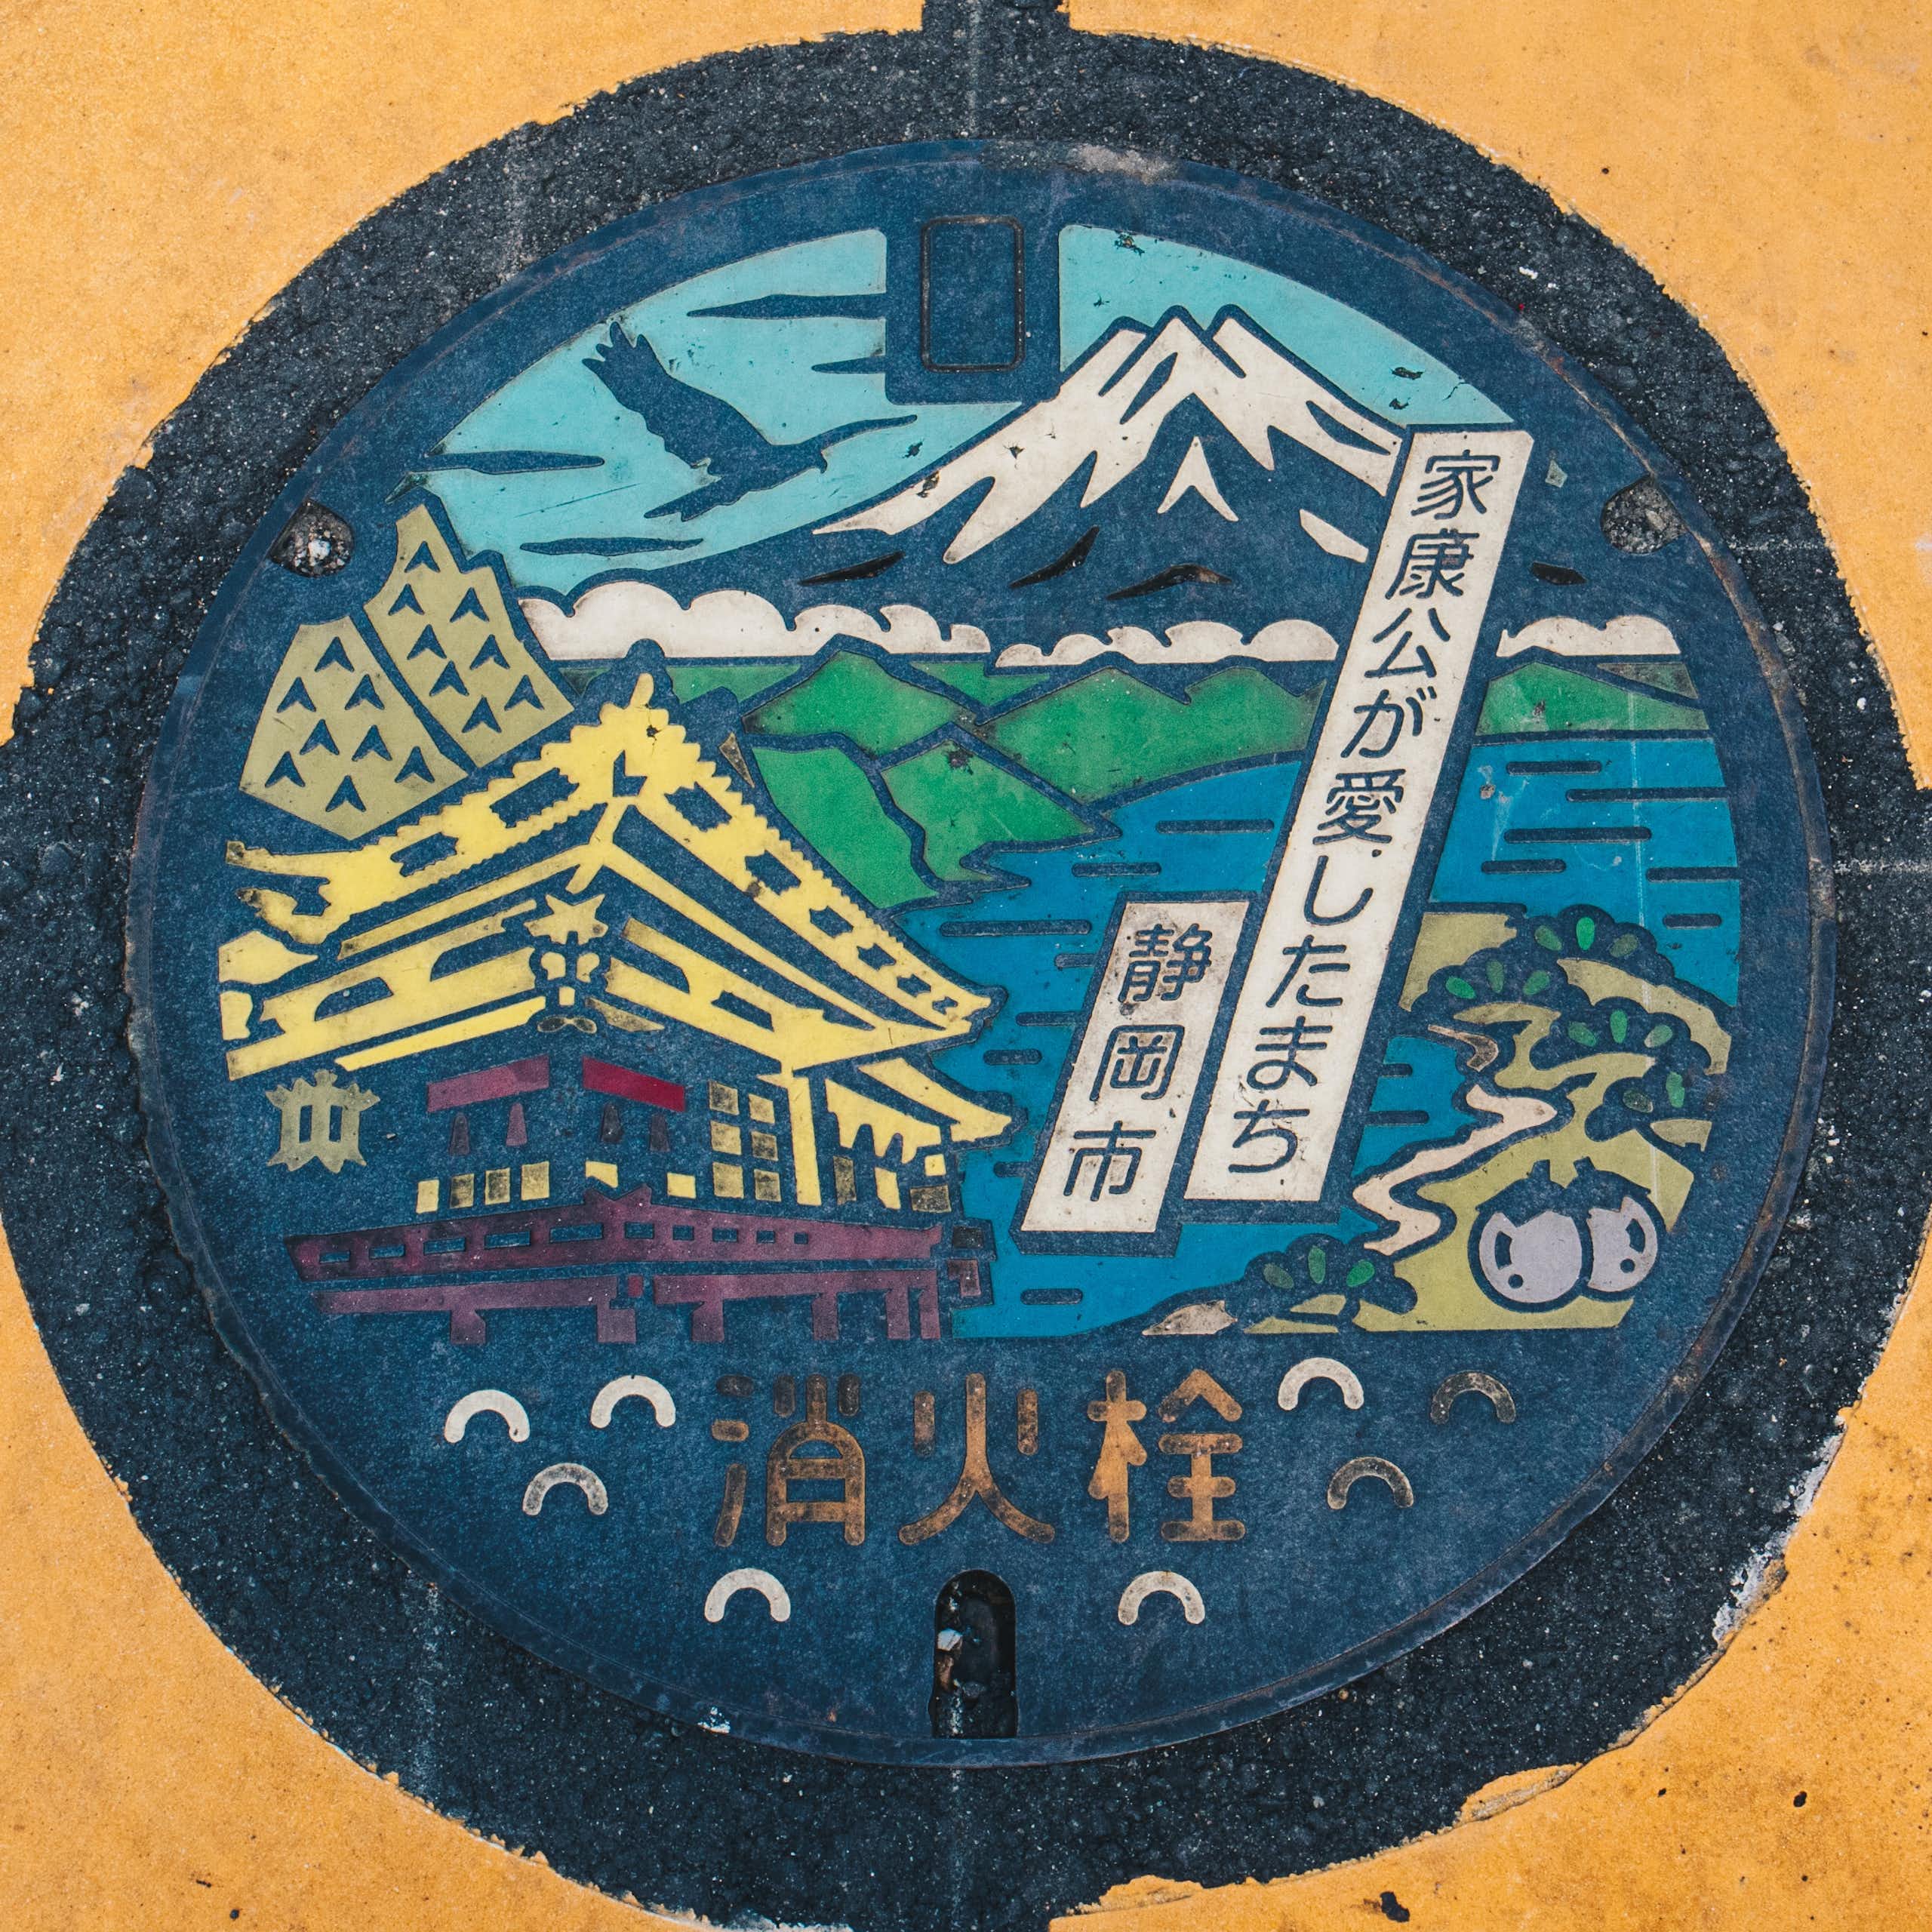 Mount Fuji on colourful manhole cover on a street pavement in Japan.